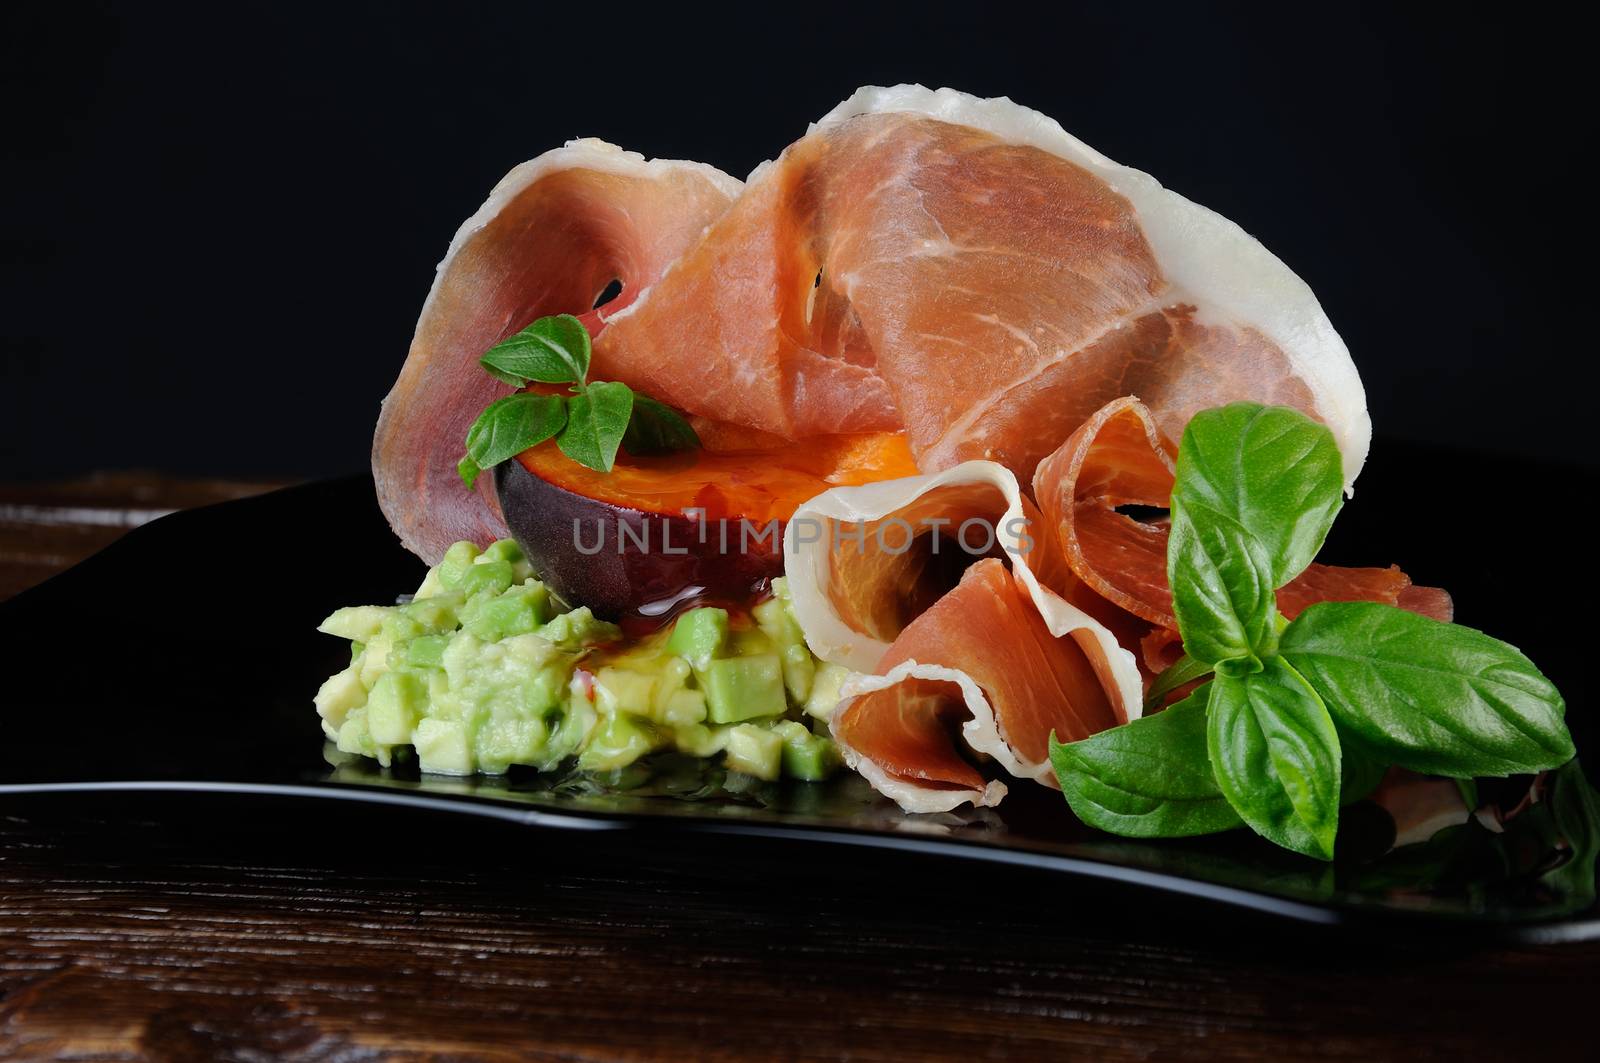 Avocado with apricot and Parma ham by Apolonia